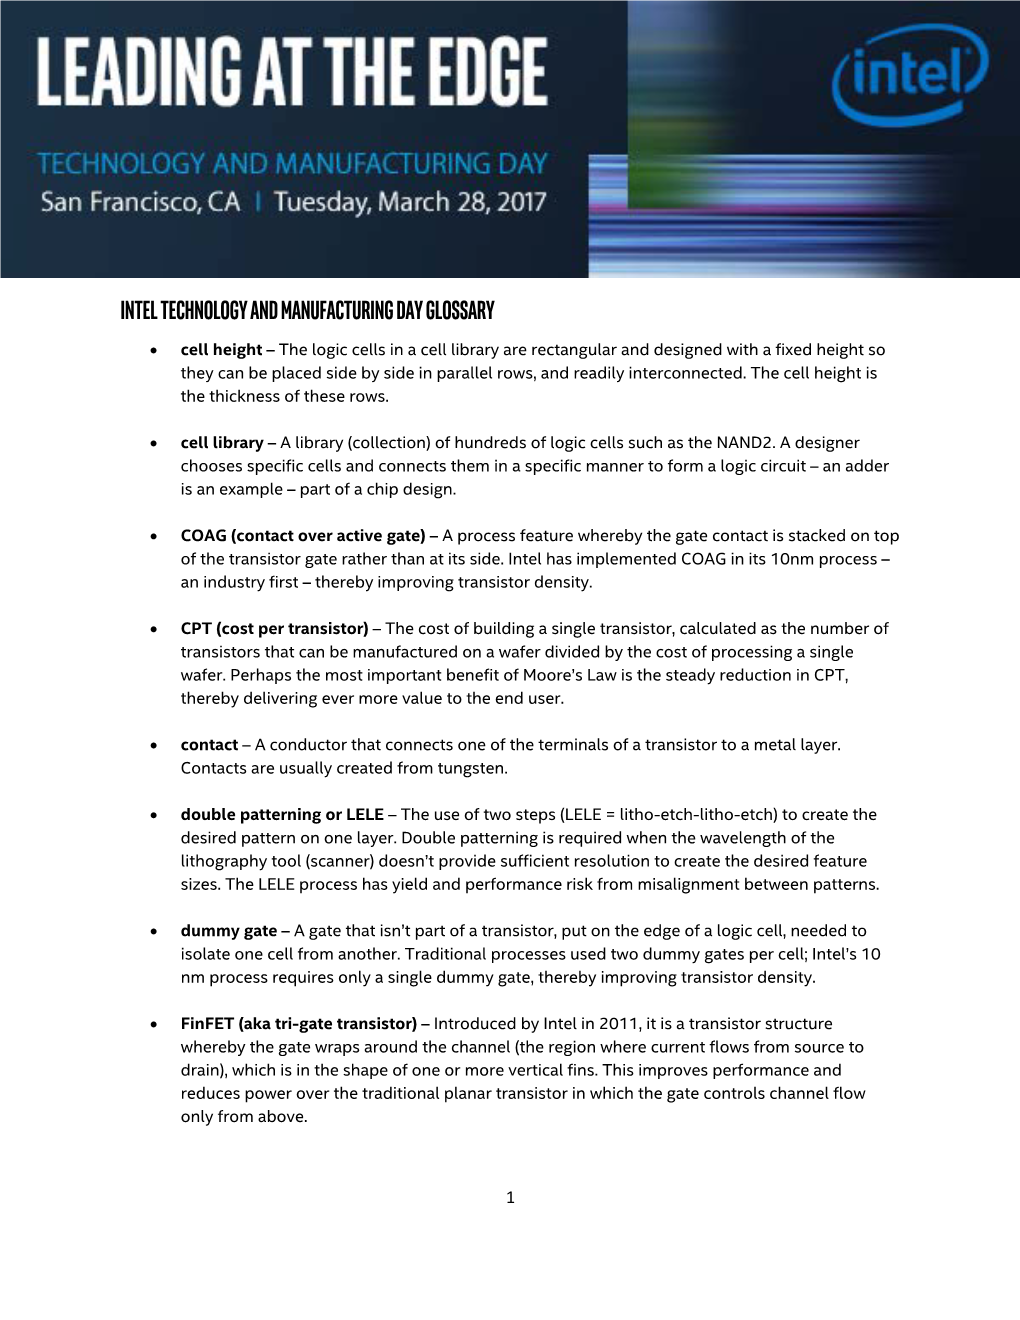 Intel Technology and Manufacturing Day Glossary